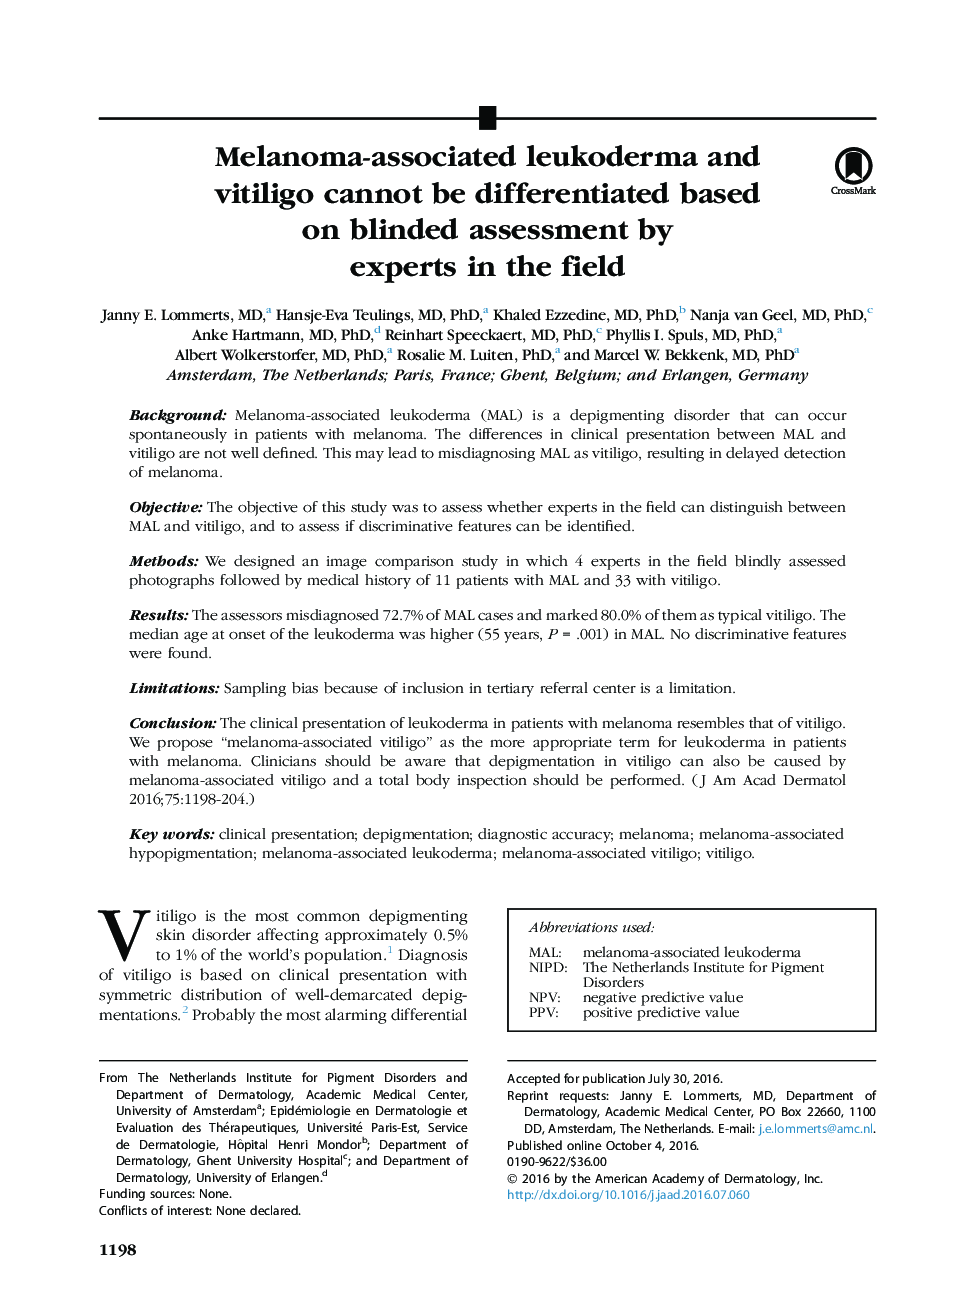 Melanoma-associated leukoderma and vitiligo cannot be differentiated based on blinded assessment by experts in the field